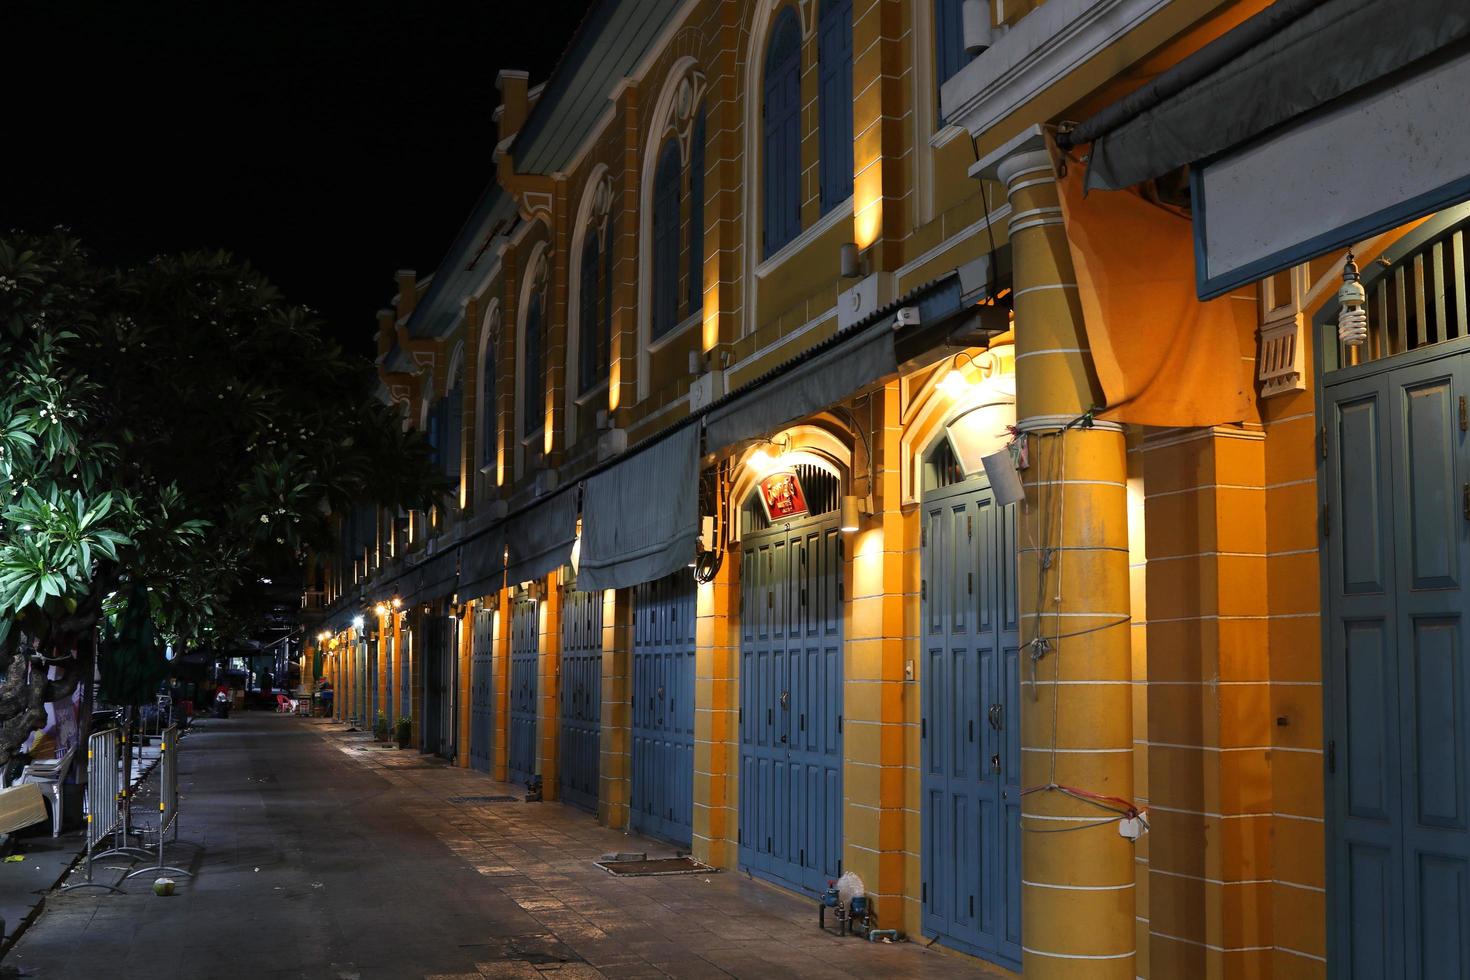 Yellow native retro building in Bangkok at night and footpath, Europe style building. photo